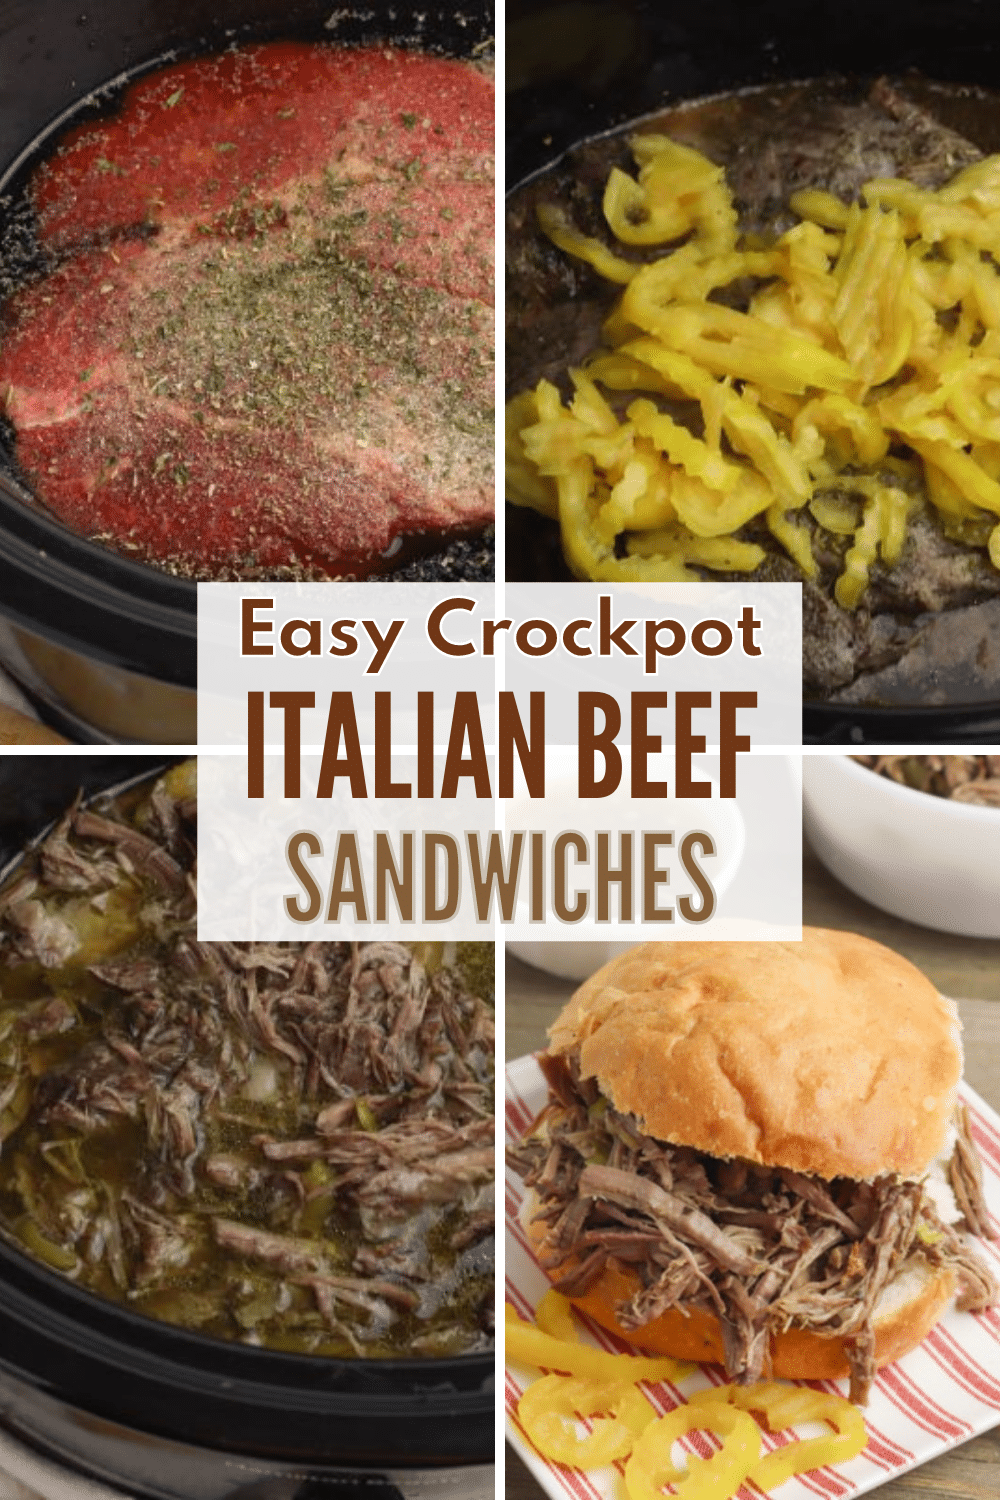 These Easy Crockpot Italian Beef Sandwiches are absolutely delicious and all you have to do is add the ingredients to the slow cooker. #crockpot #italianbeef #slowcooker via @wondermomwannab